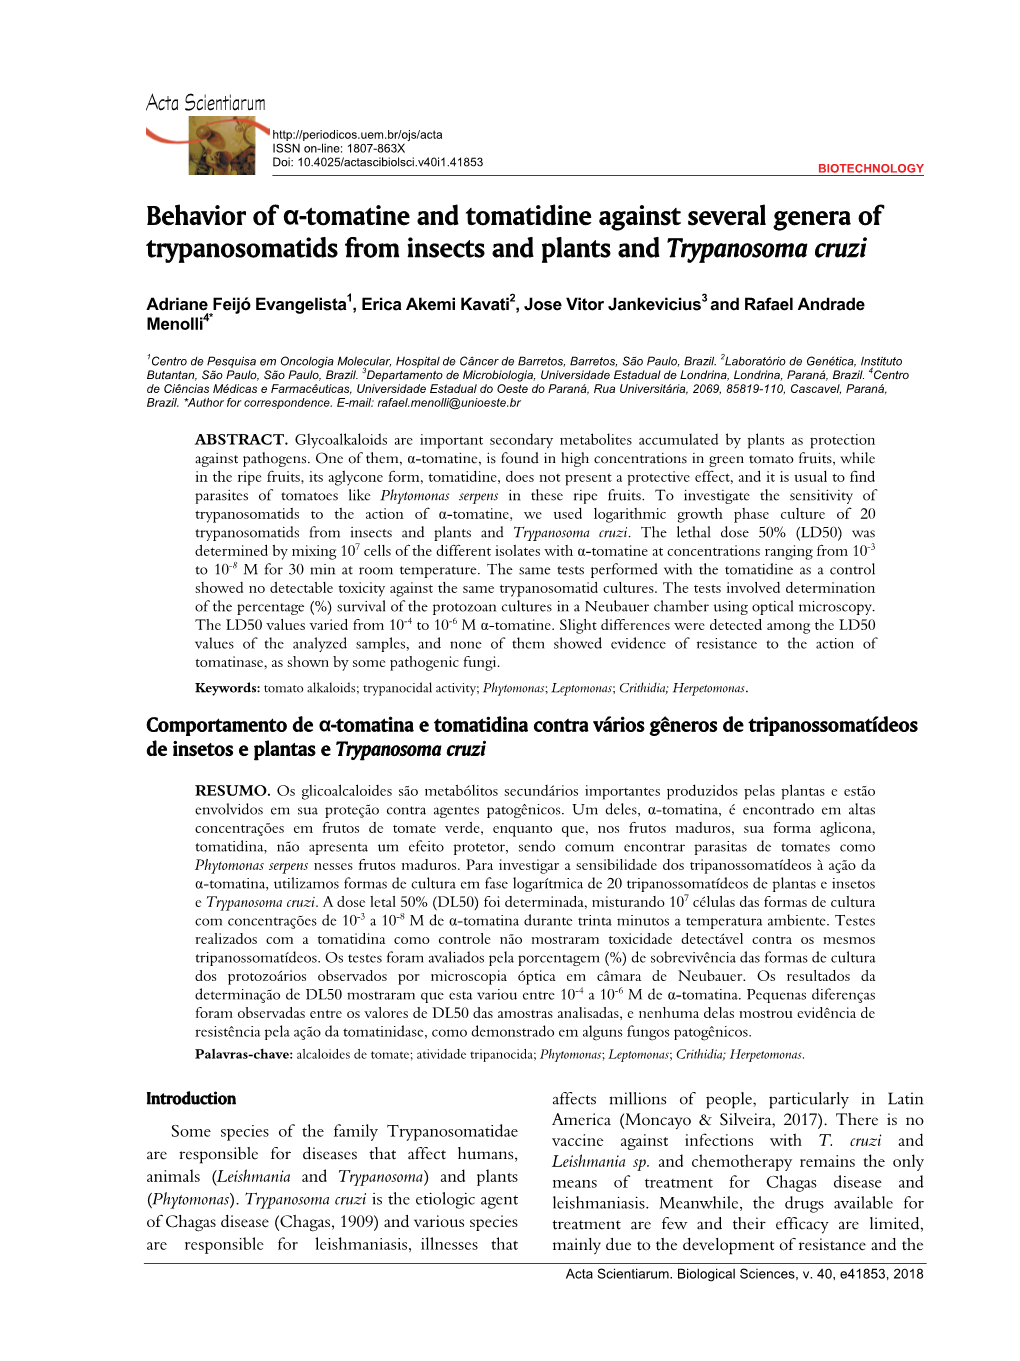 Behavior of Α-Tomatine and Tomatidine Against Several Genera of Trypanosomatids from Insects and Plants and Trypanosoma Cruzi